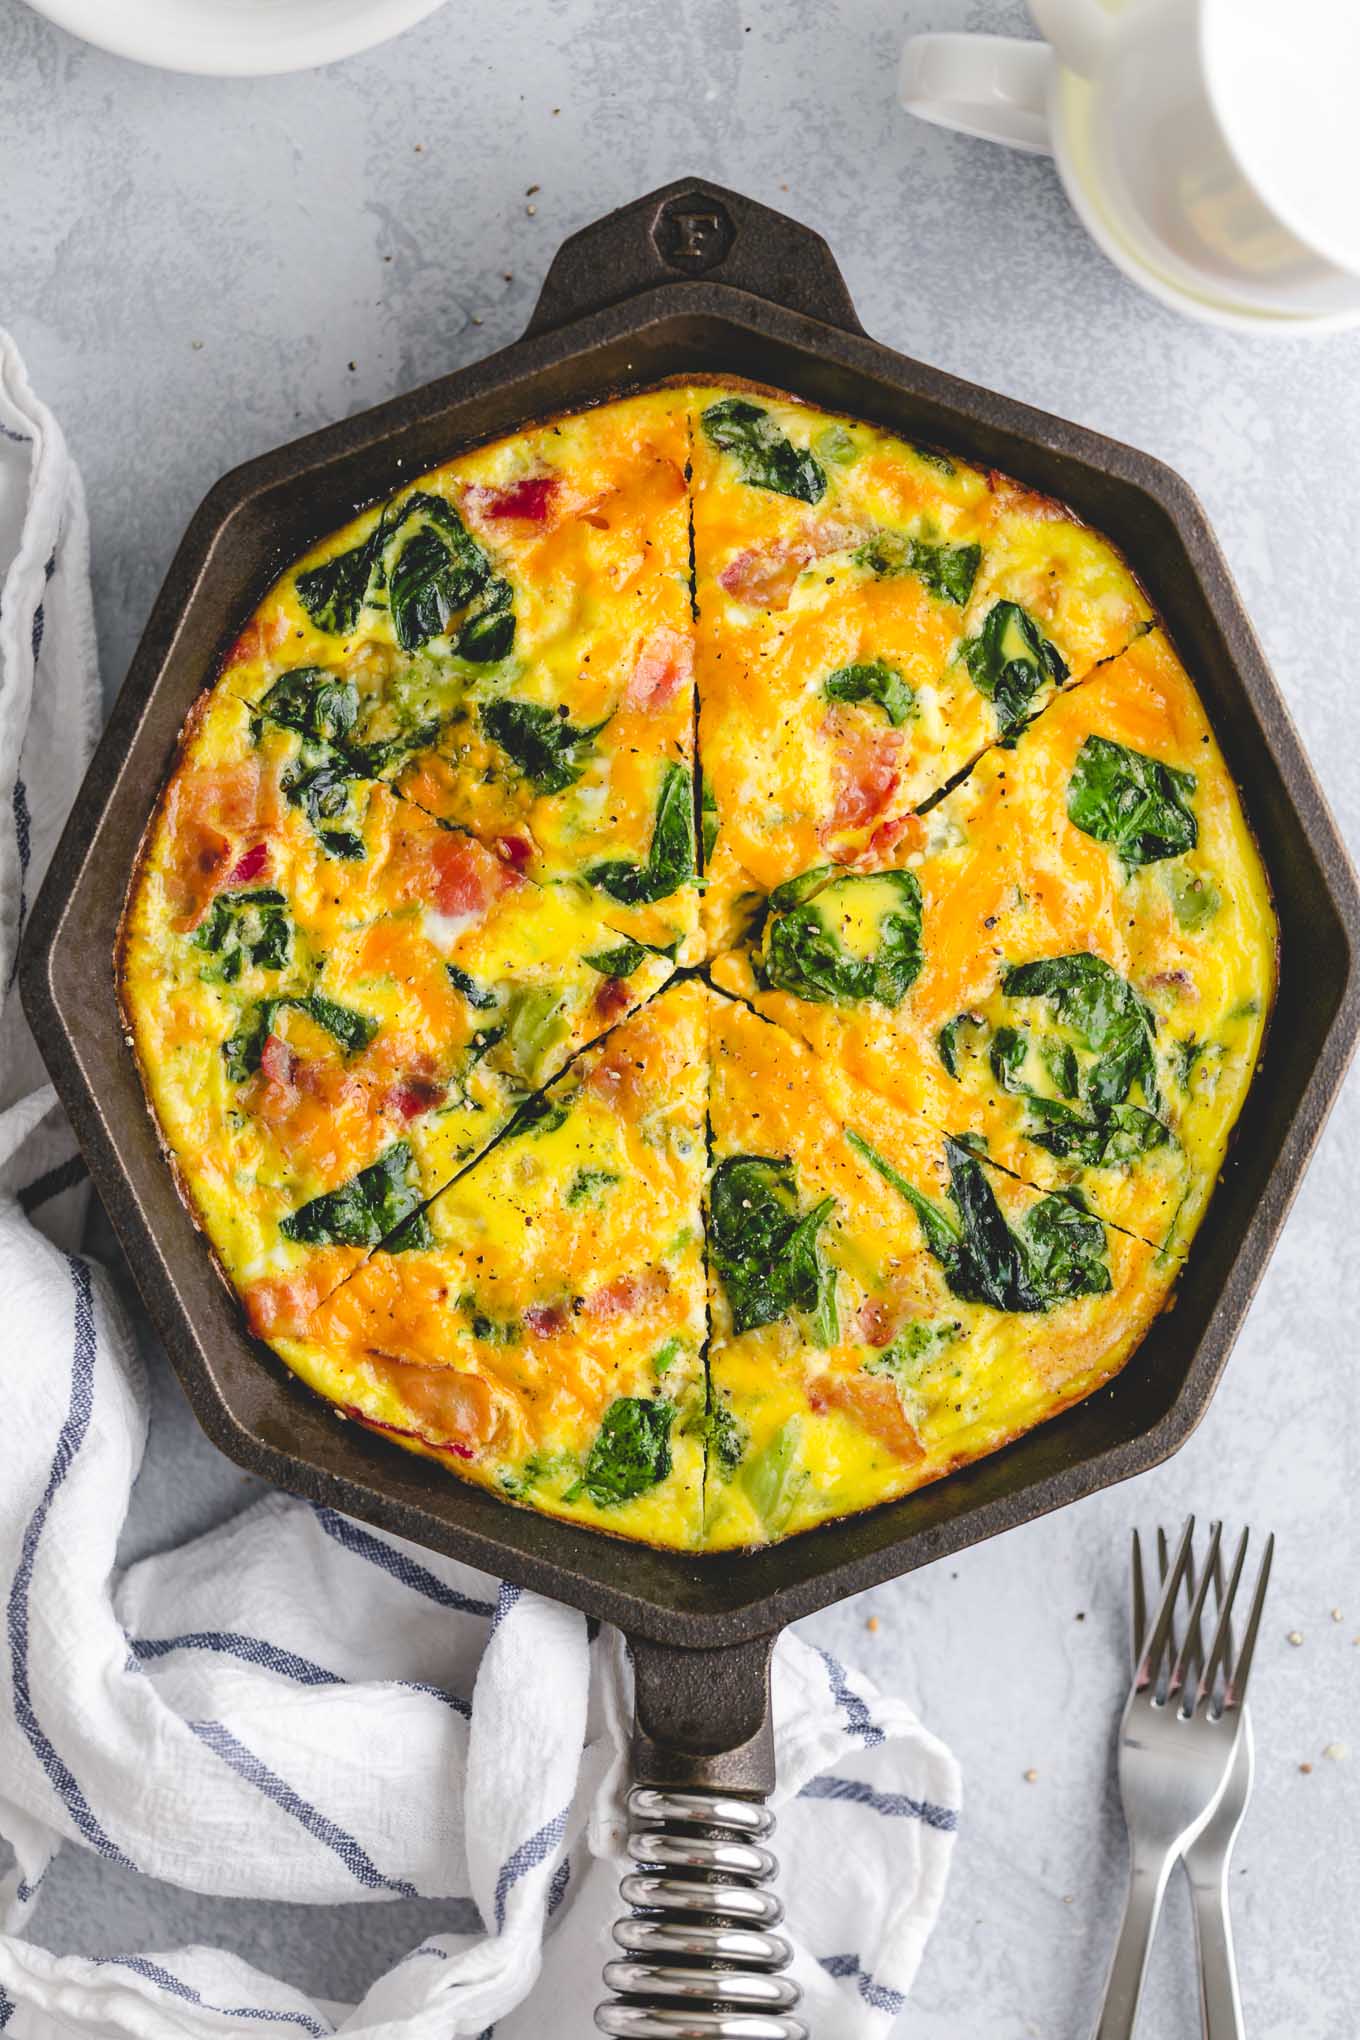 Spinach Frittata with Bacon, Broccoli, and Cheddar Cheese